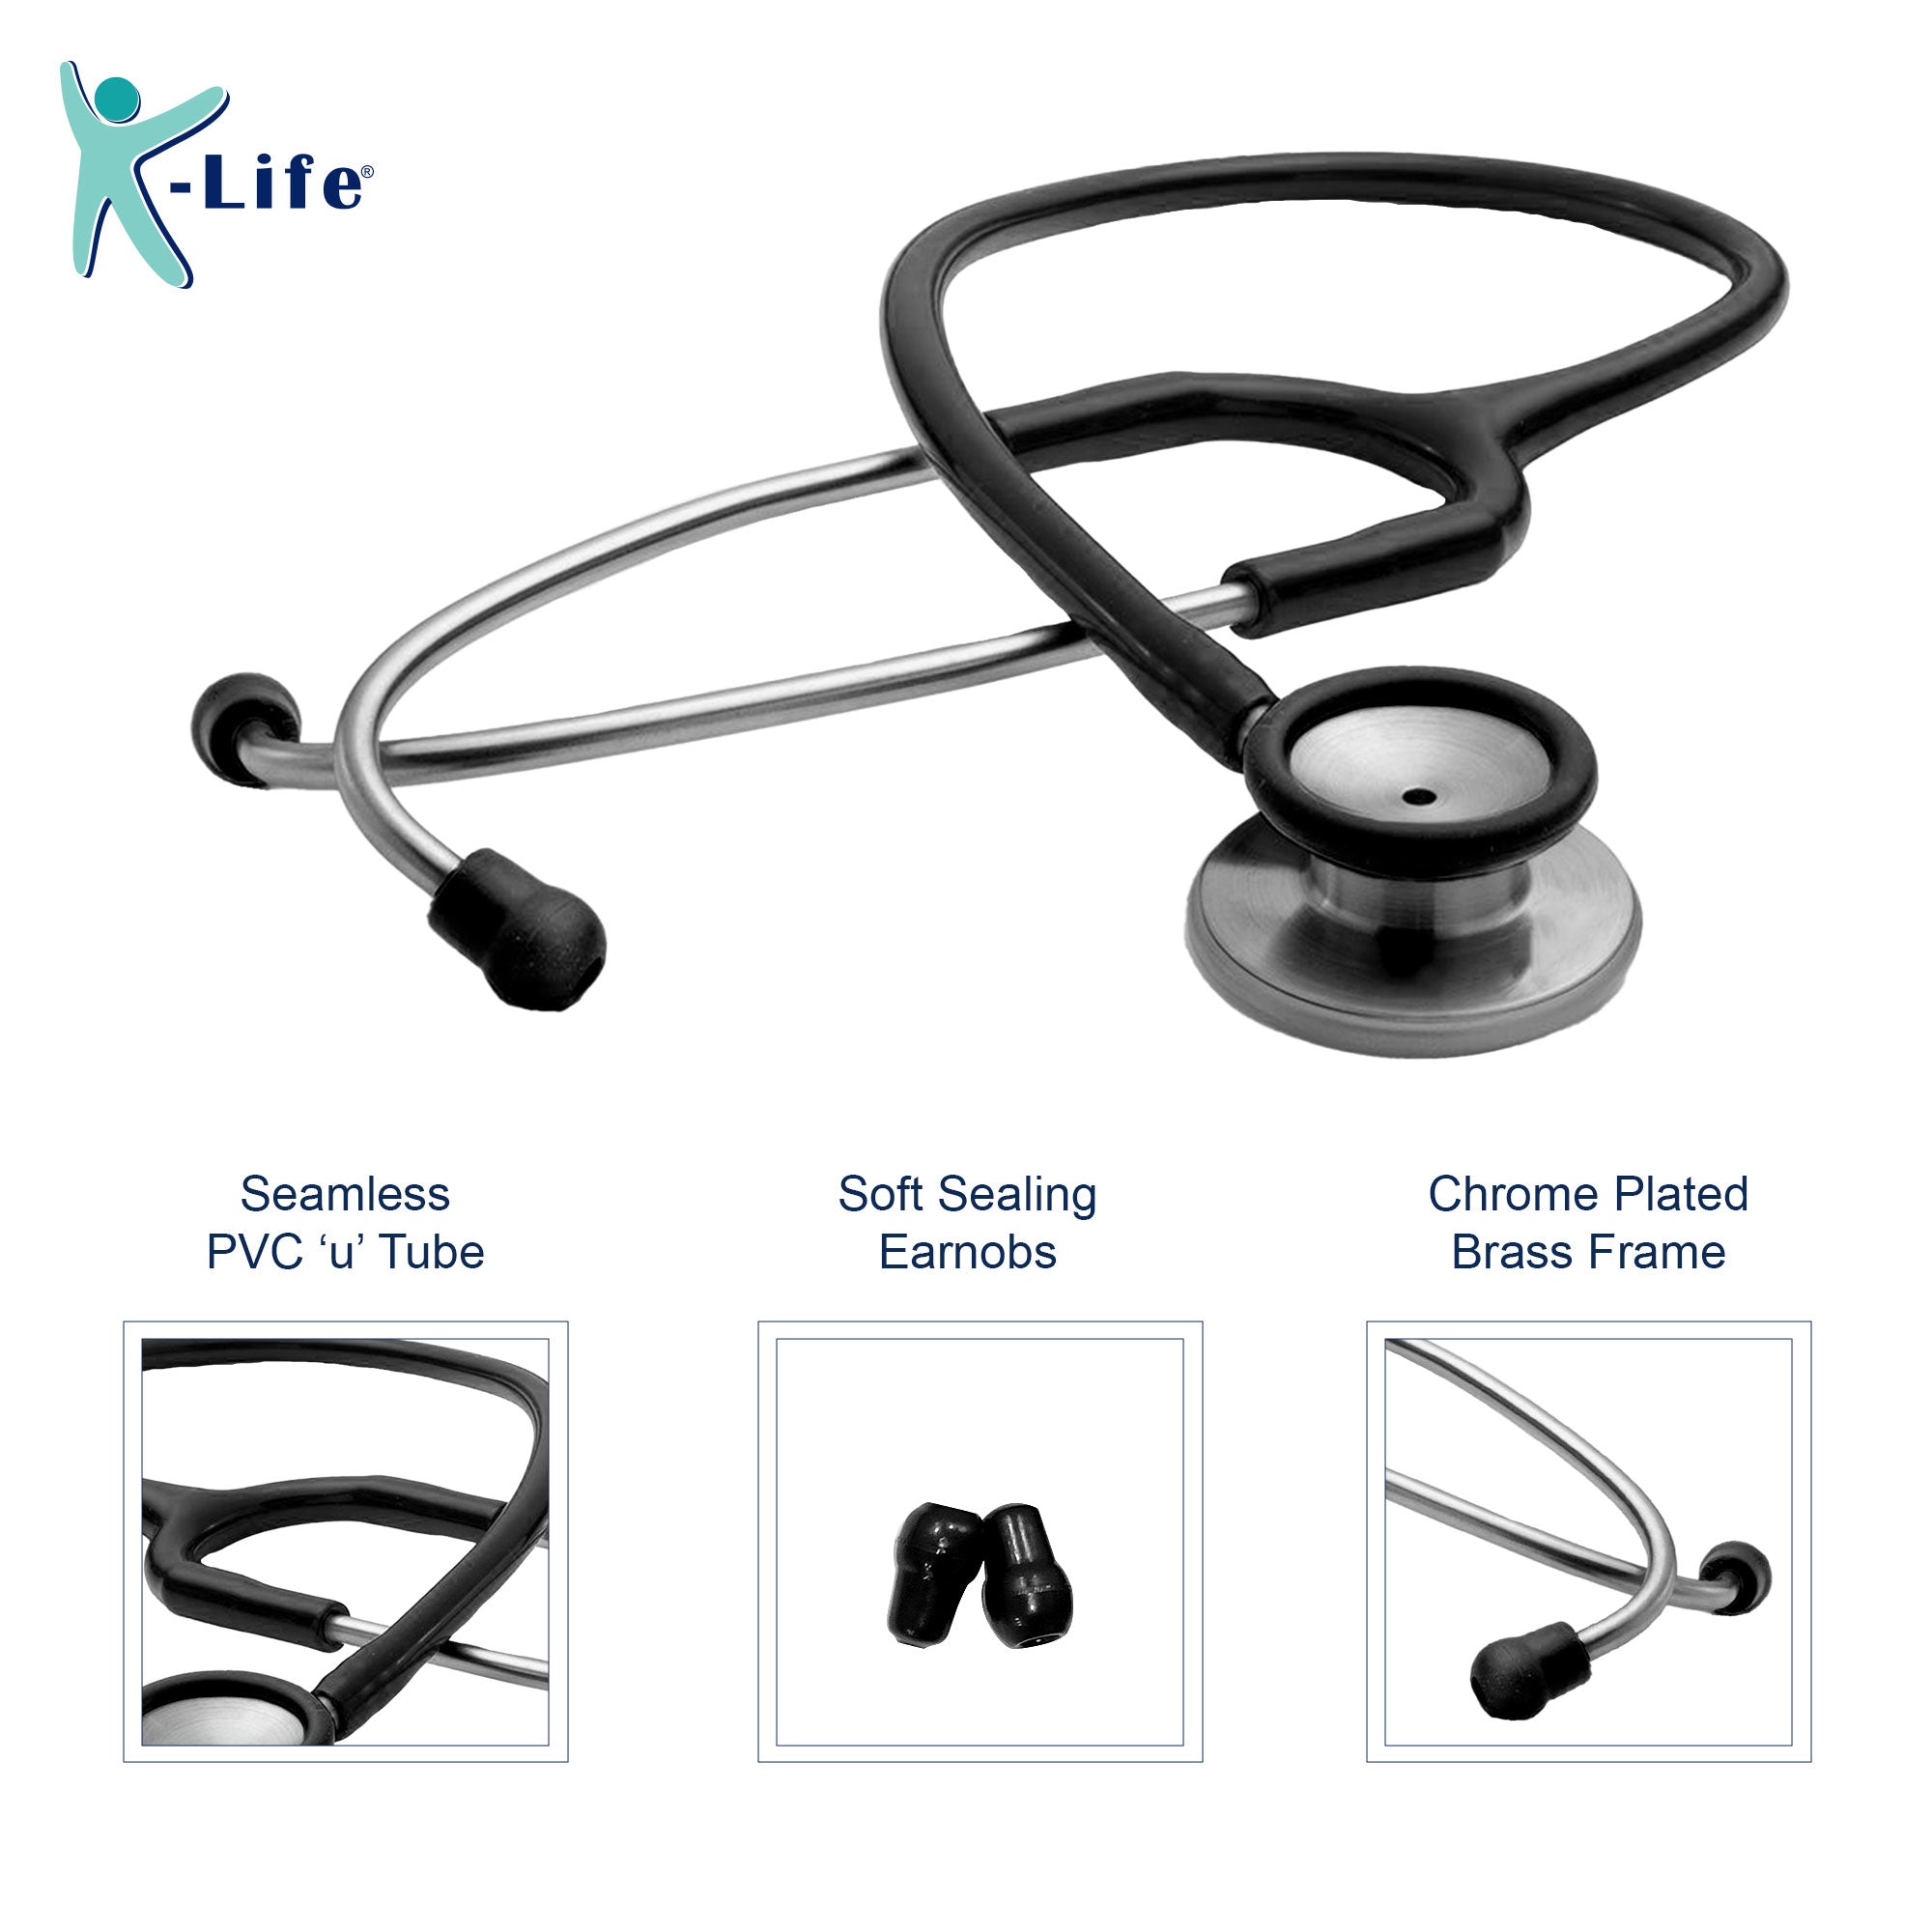 K-life ST-103 Professional Single head Chest Piece for medical students nurses doctors Acoustic Stethoscope